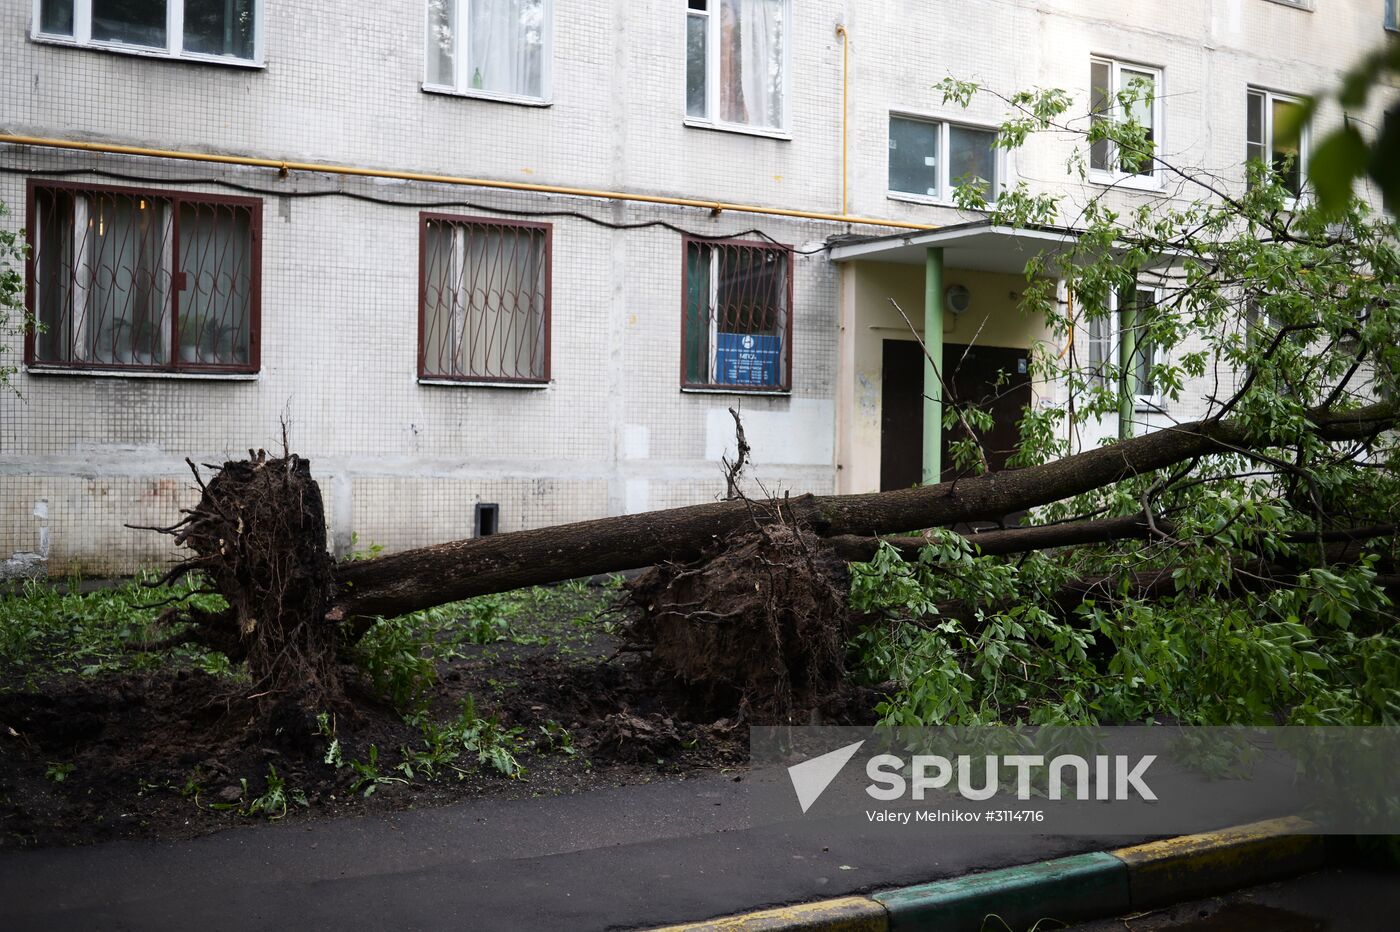 Hurricane aftermath in Moscow